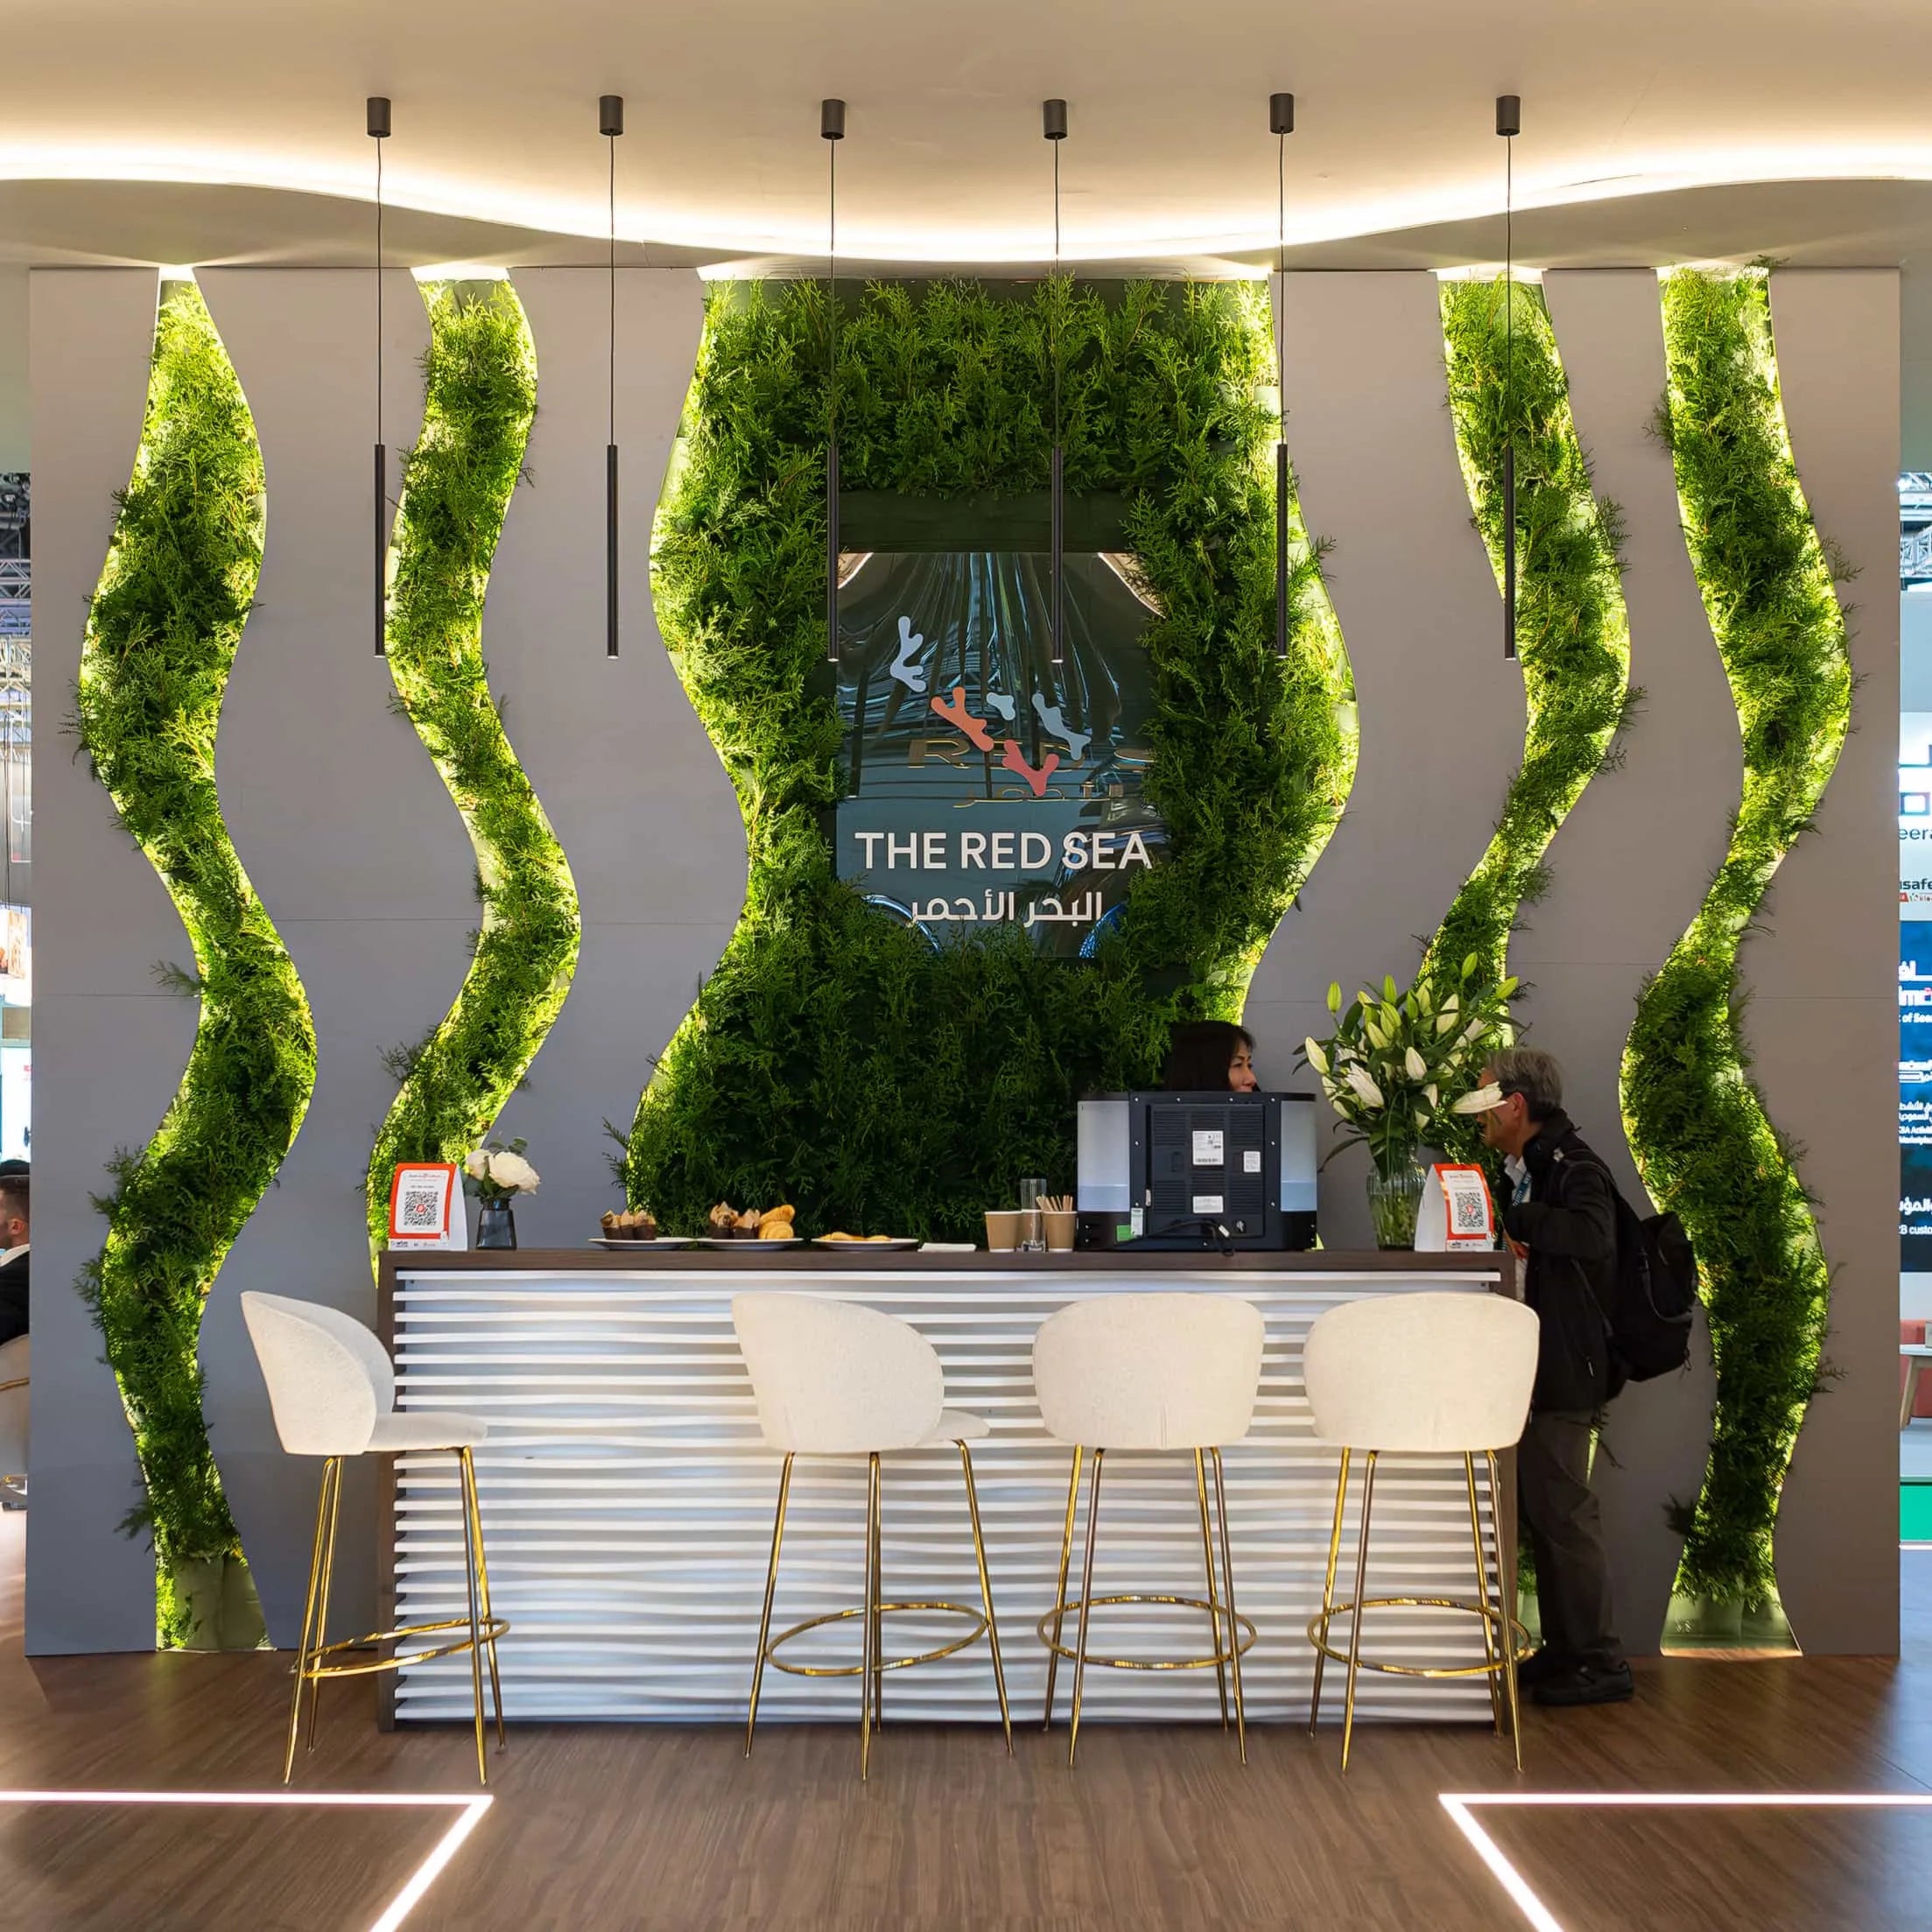 A plush green wall with a wavy design behind a bar area creates a dynamic, inviting space with integrated seating for guests to enjoy a coffee or a drink at WTM London—designed by Amaranté London.